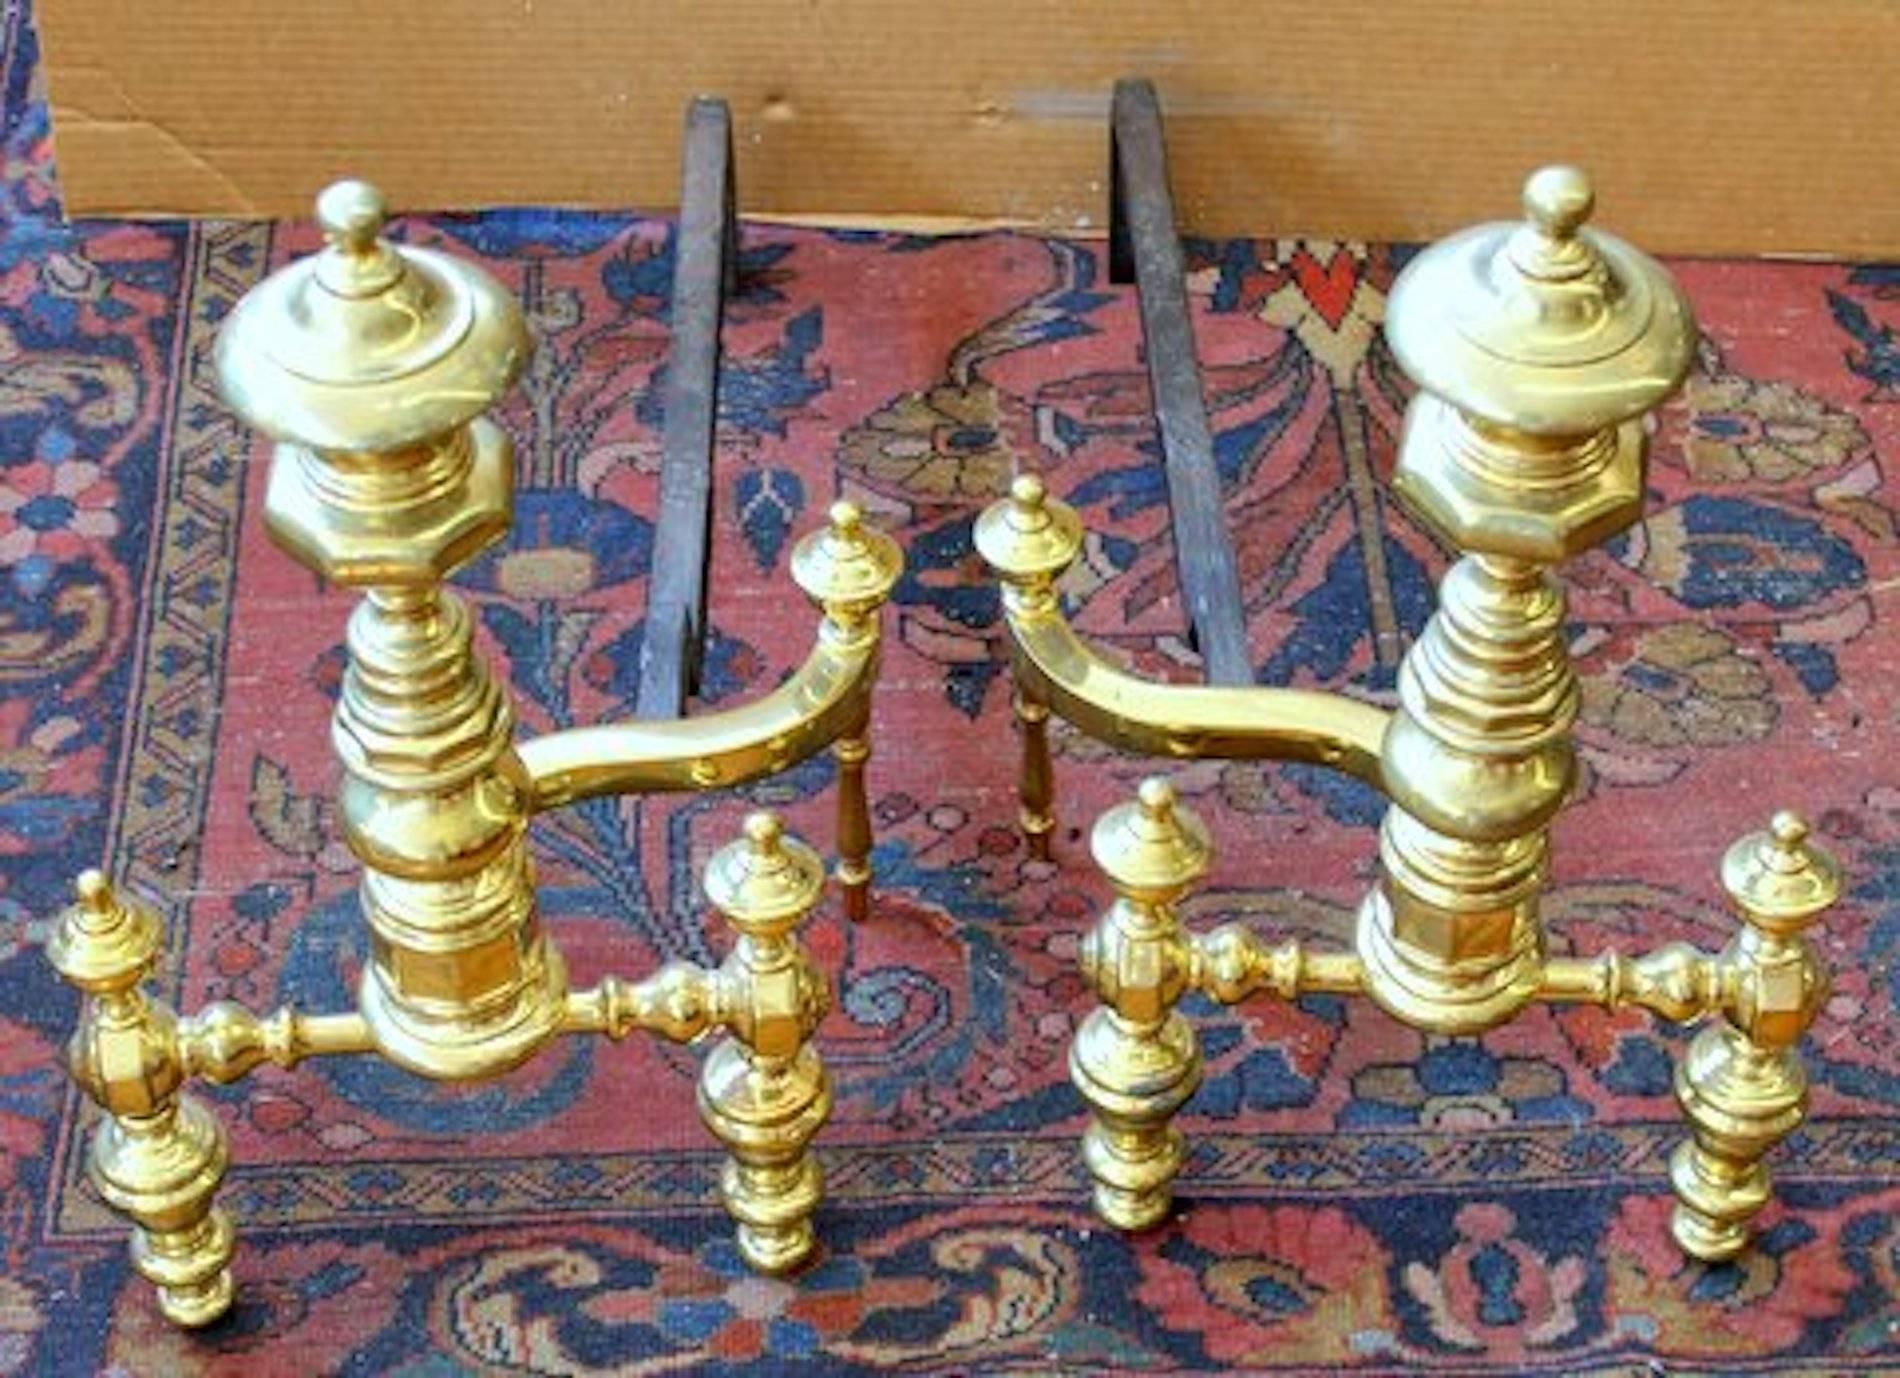 Fabulous pair of antique American large Federal style solid brass andirons, attributed to being New York made. Fabulous quality and professionally polished just recently.